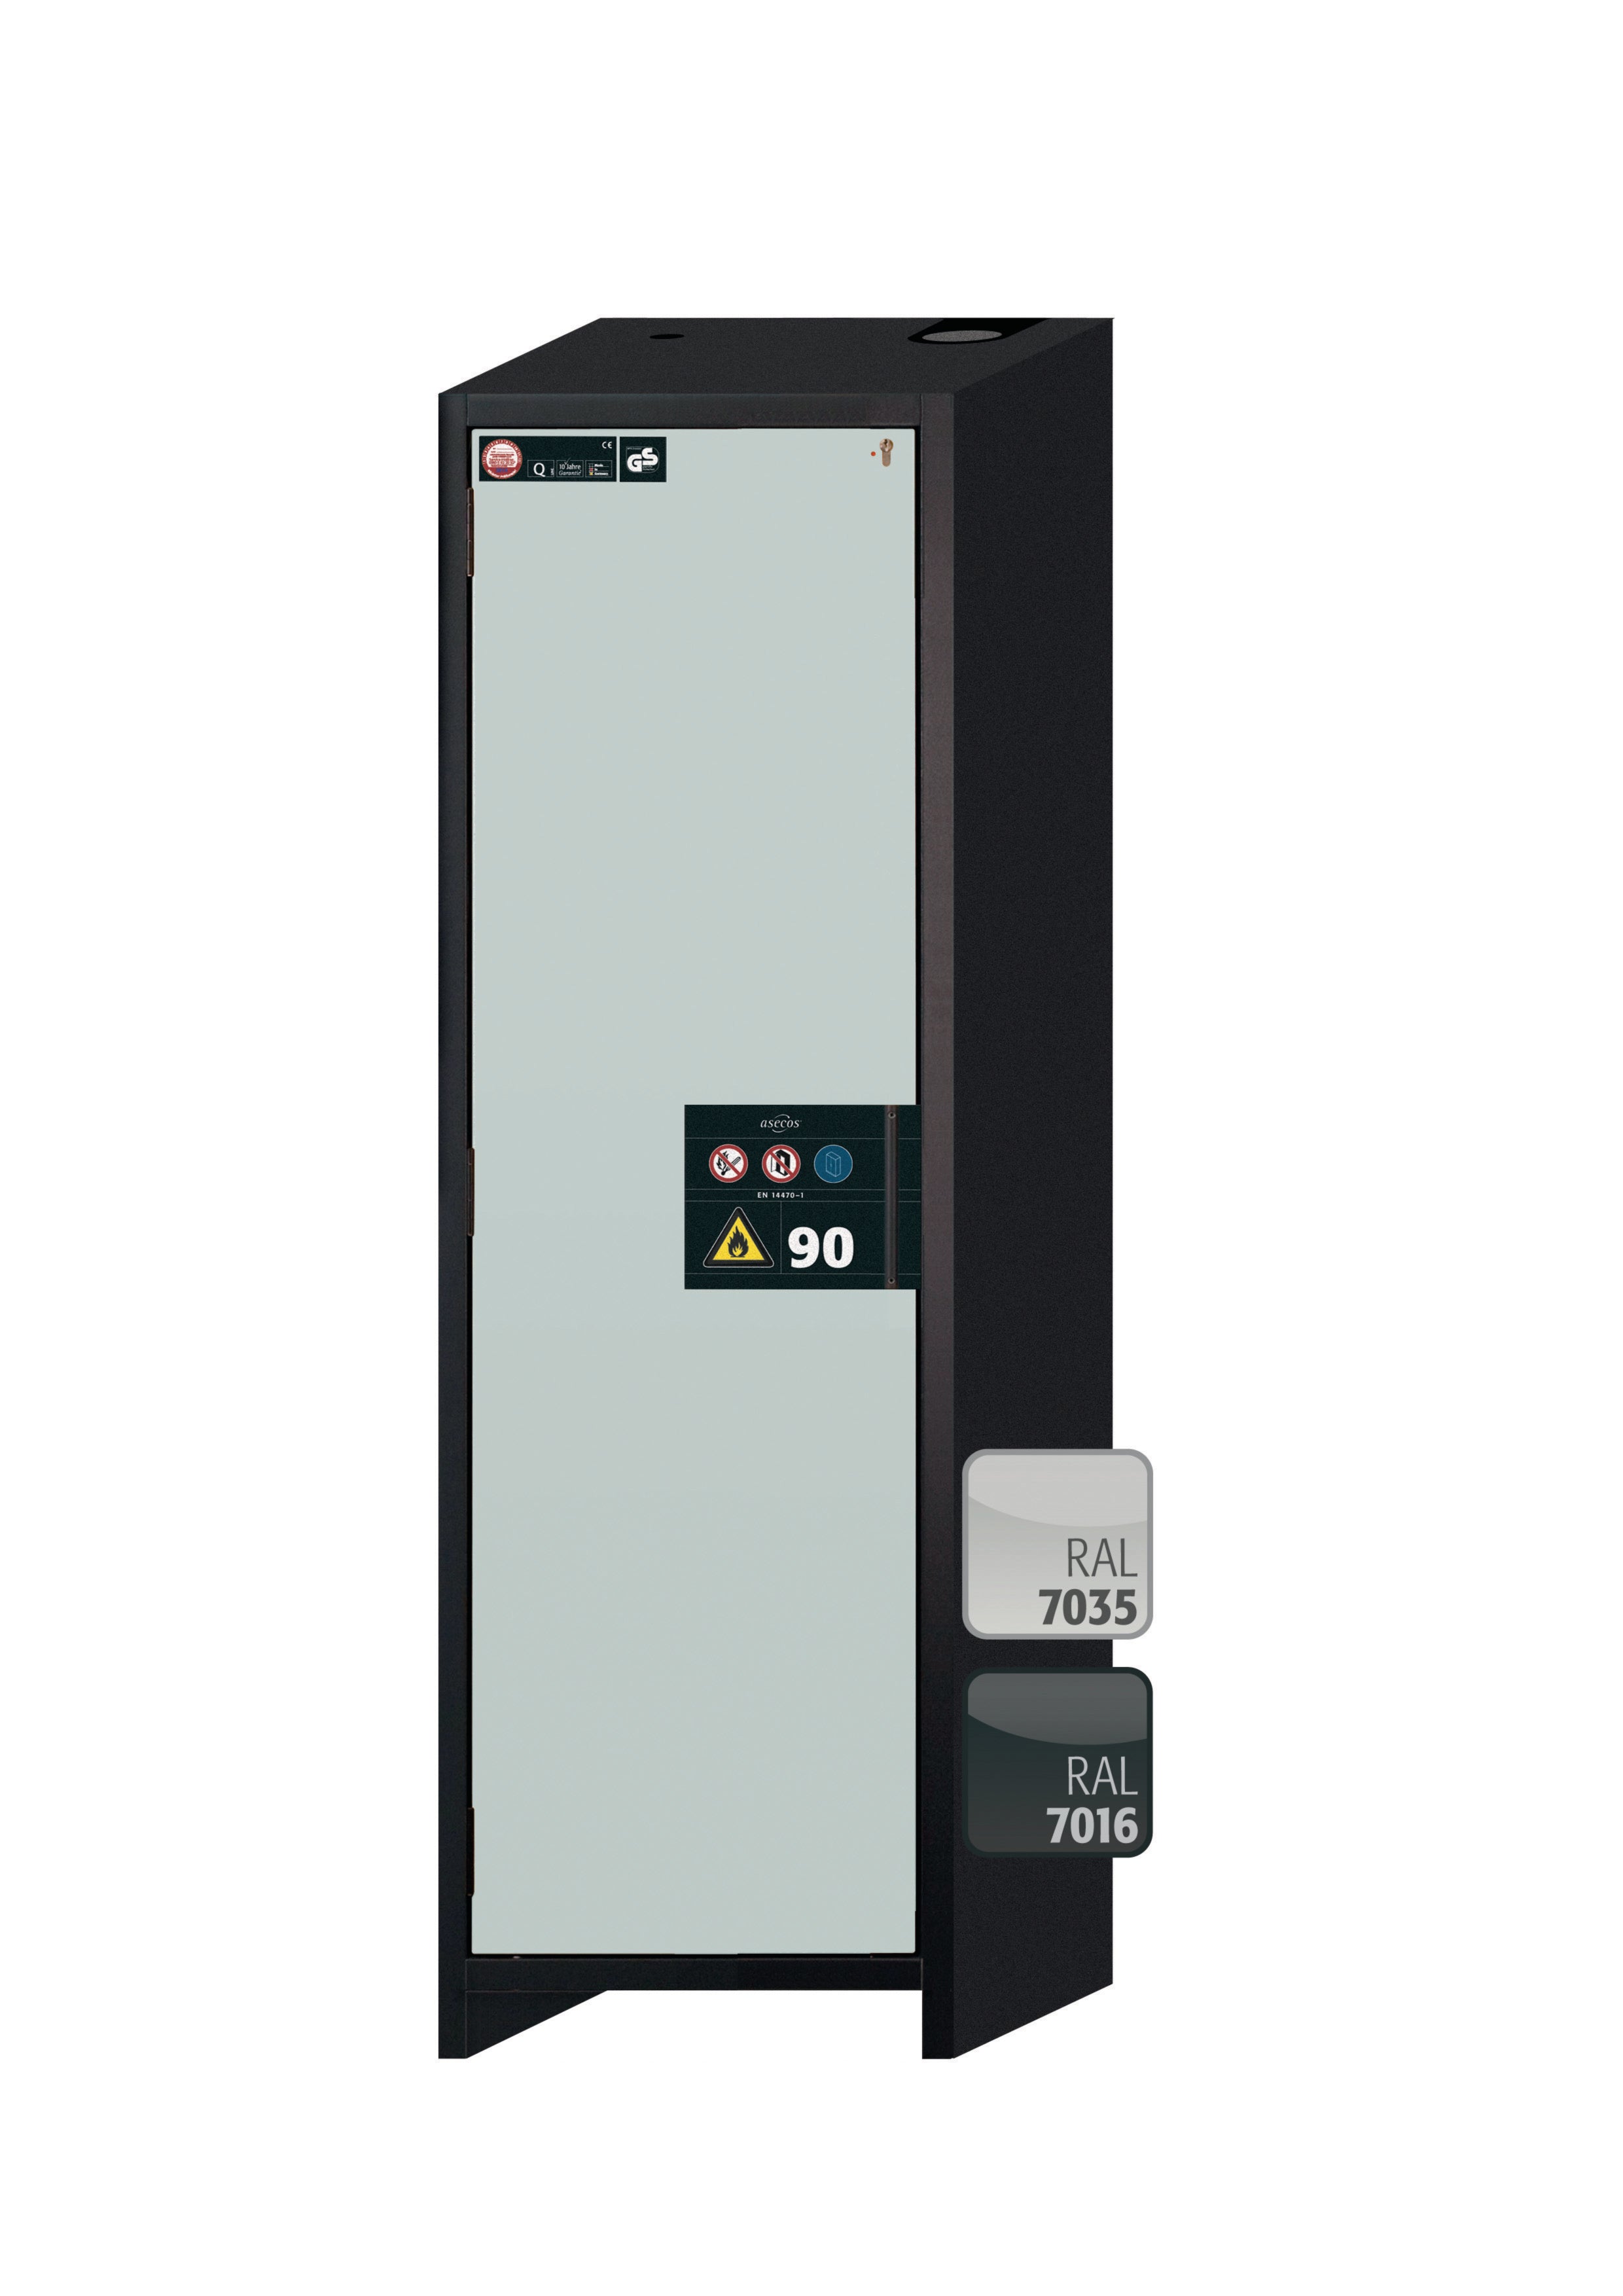 Type 90 safety storage cabinet Q-PEGASUS-90 model Q90.195.060.WDAC in light grey RAL 7035 with 2x shelf standard (stainless steel 1.4301),